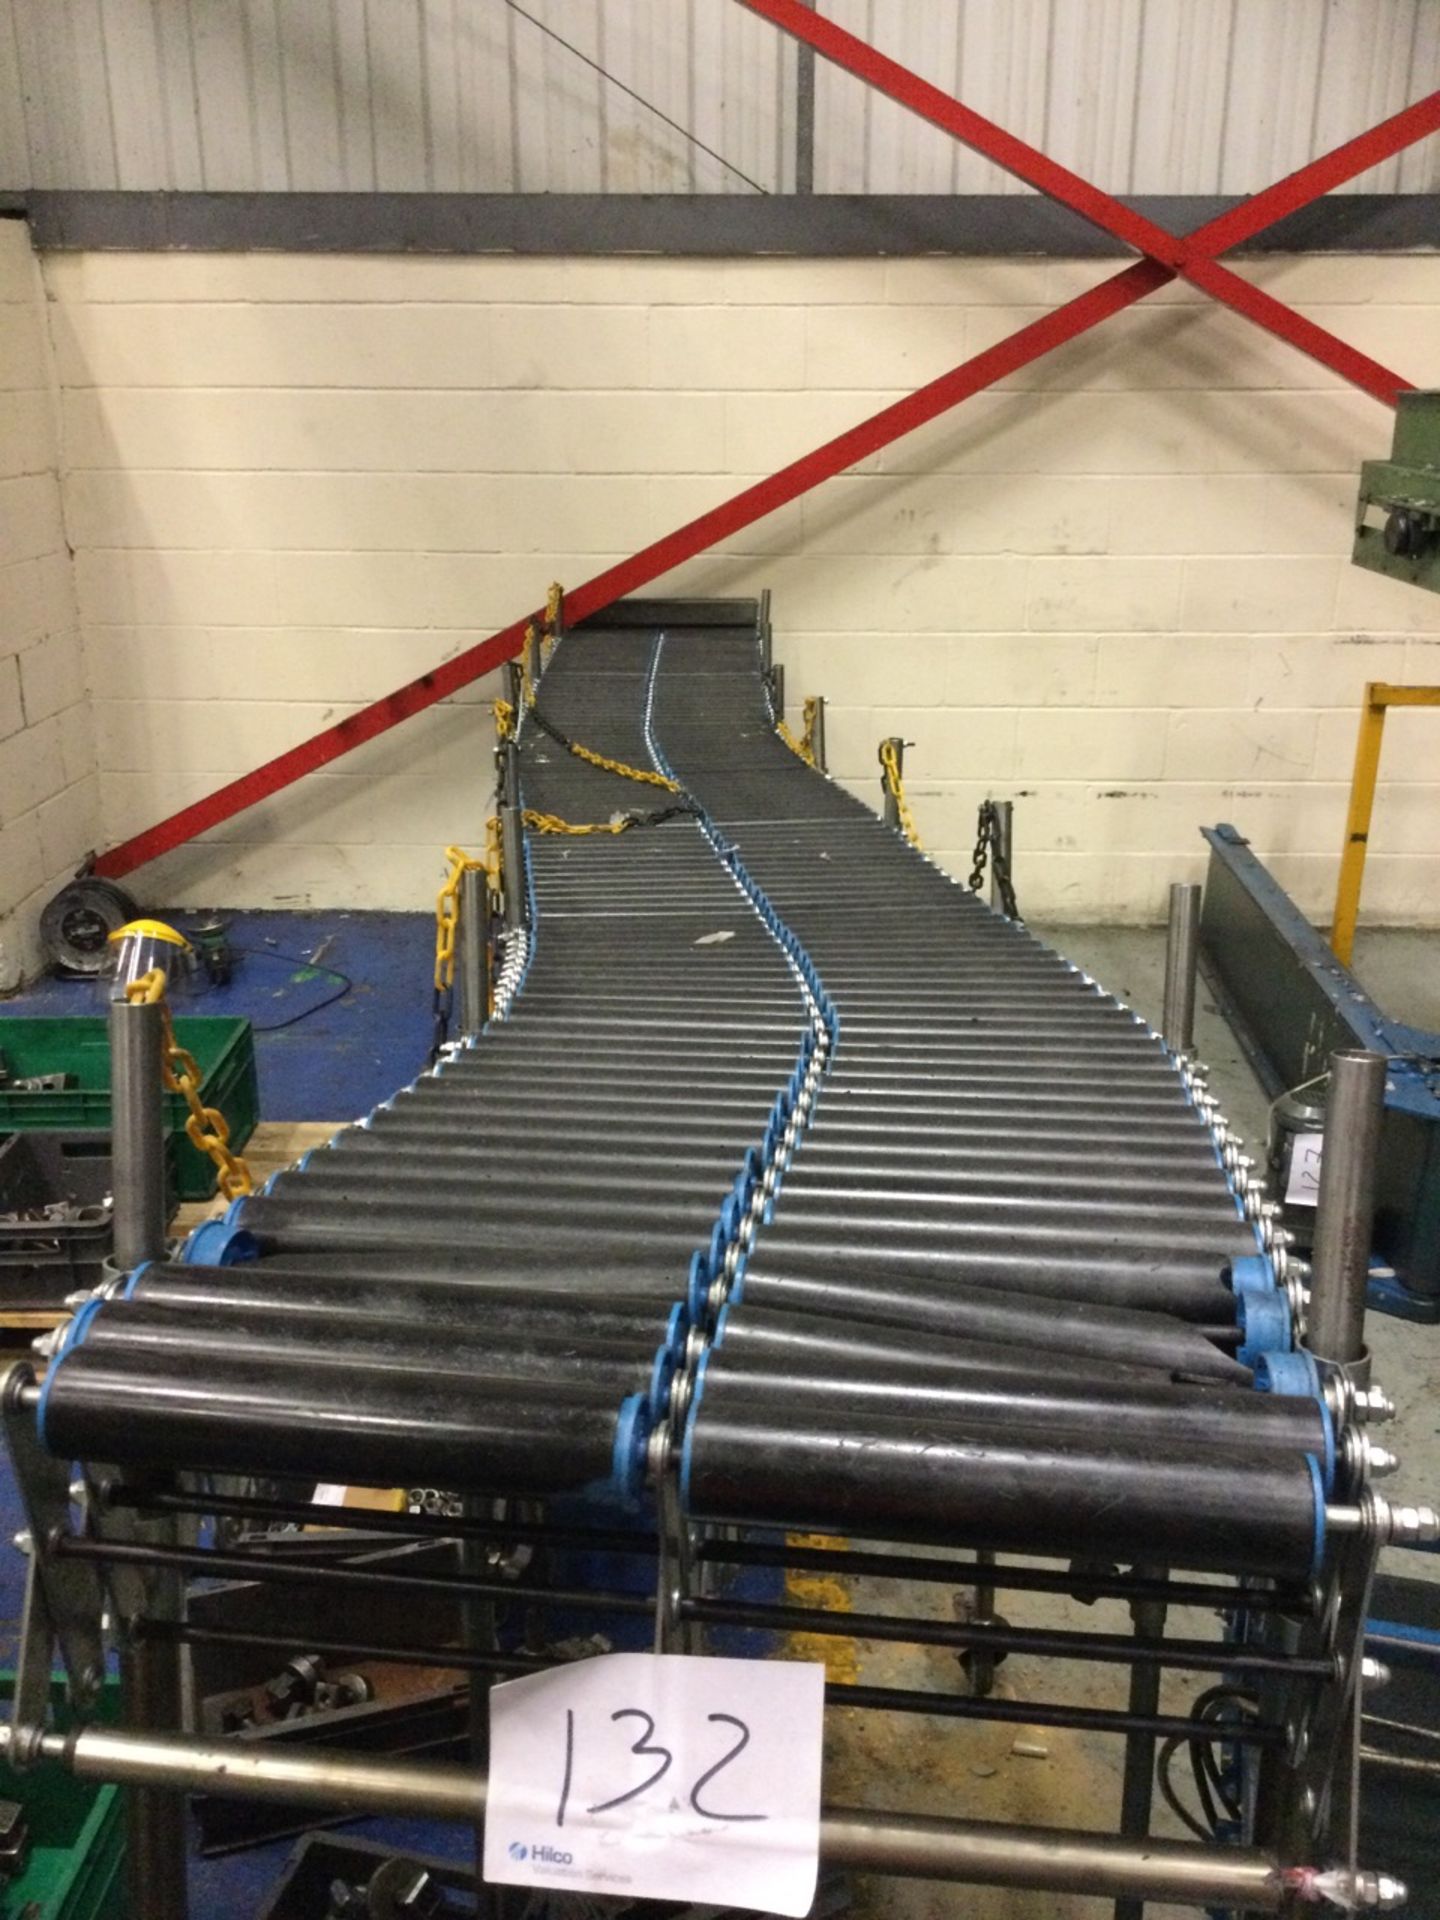 1, Extending Gravity Conveyor, Closed Length 465 Cm X 56 Cm And With Adjustable Height Legs